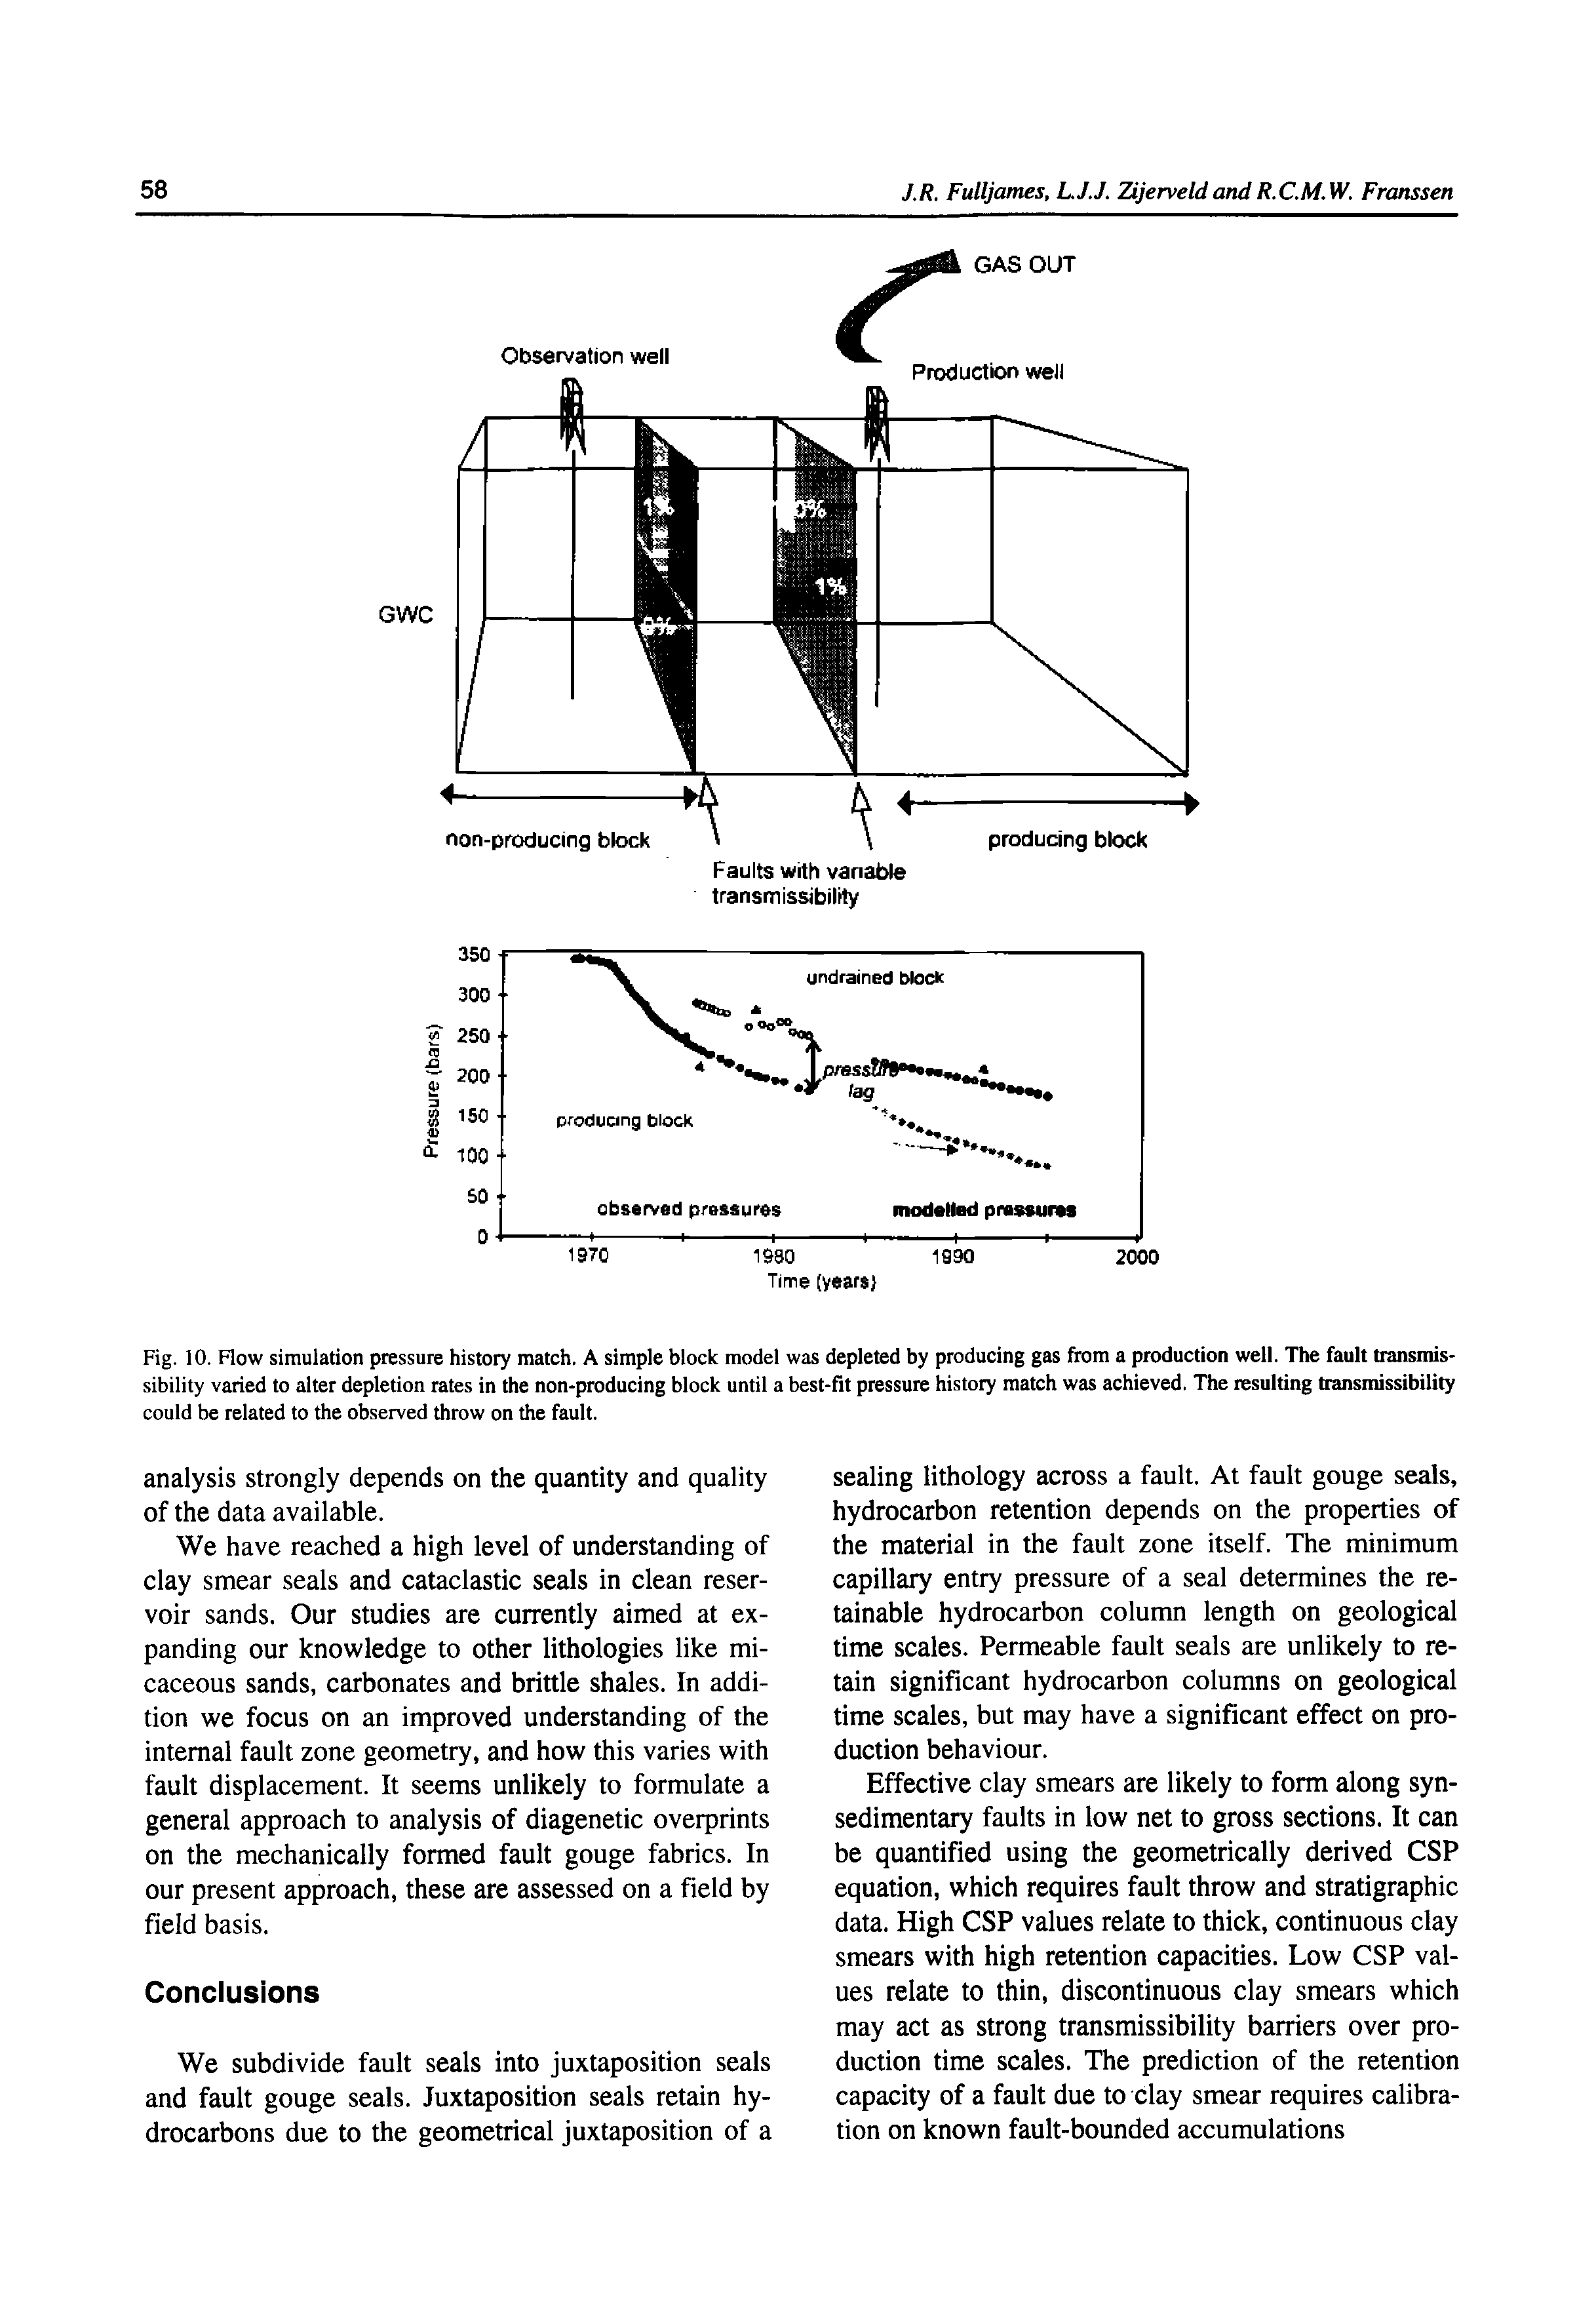 Fig. 10. Flow simulation pressure history match. A simple block model was depleted by producing gas from a production well. The fault transmis-sibility varied to alter depletion rates in the non-producing block until a best-fit pressure history match was achieved. The resulting transmissibility could be related to the observed throw on the fault.